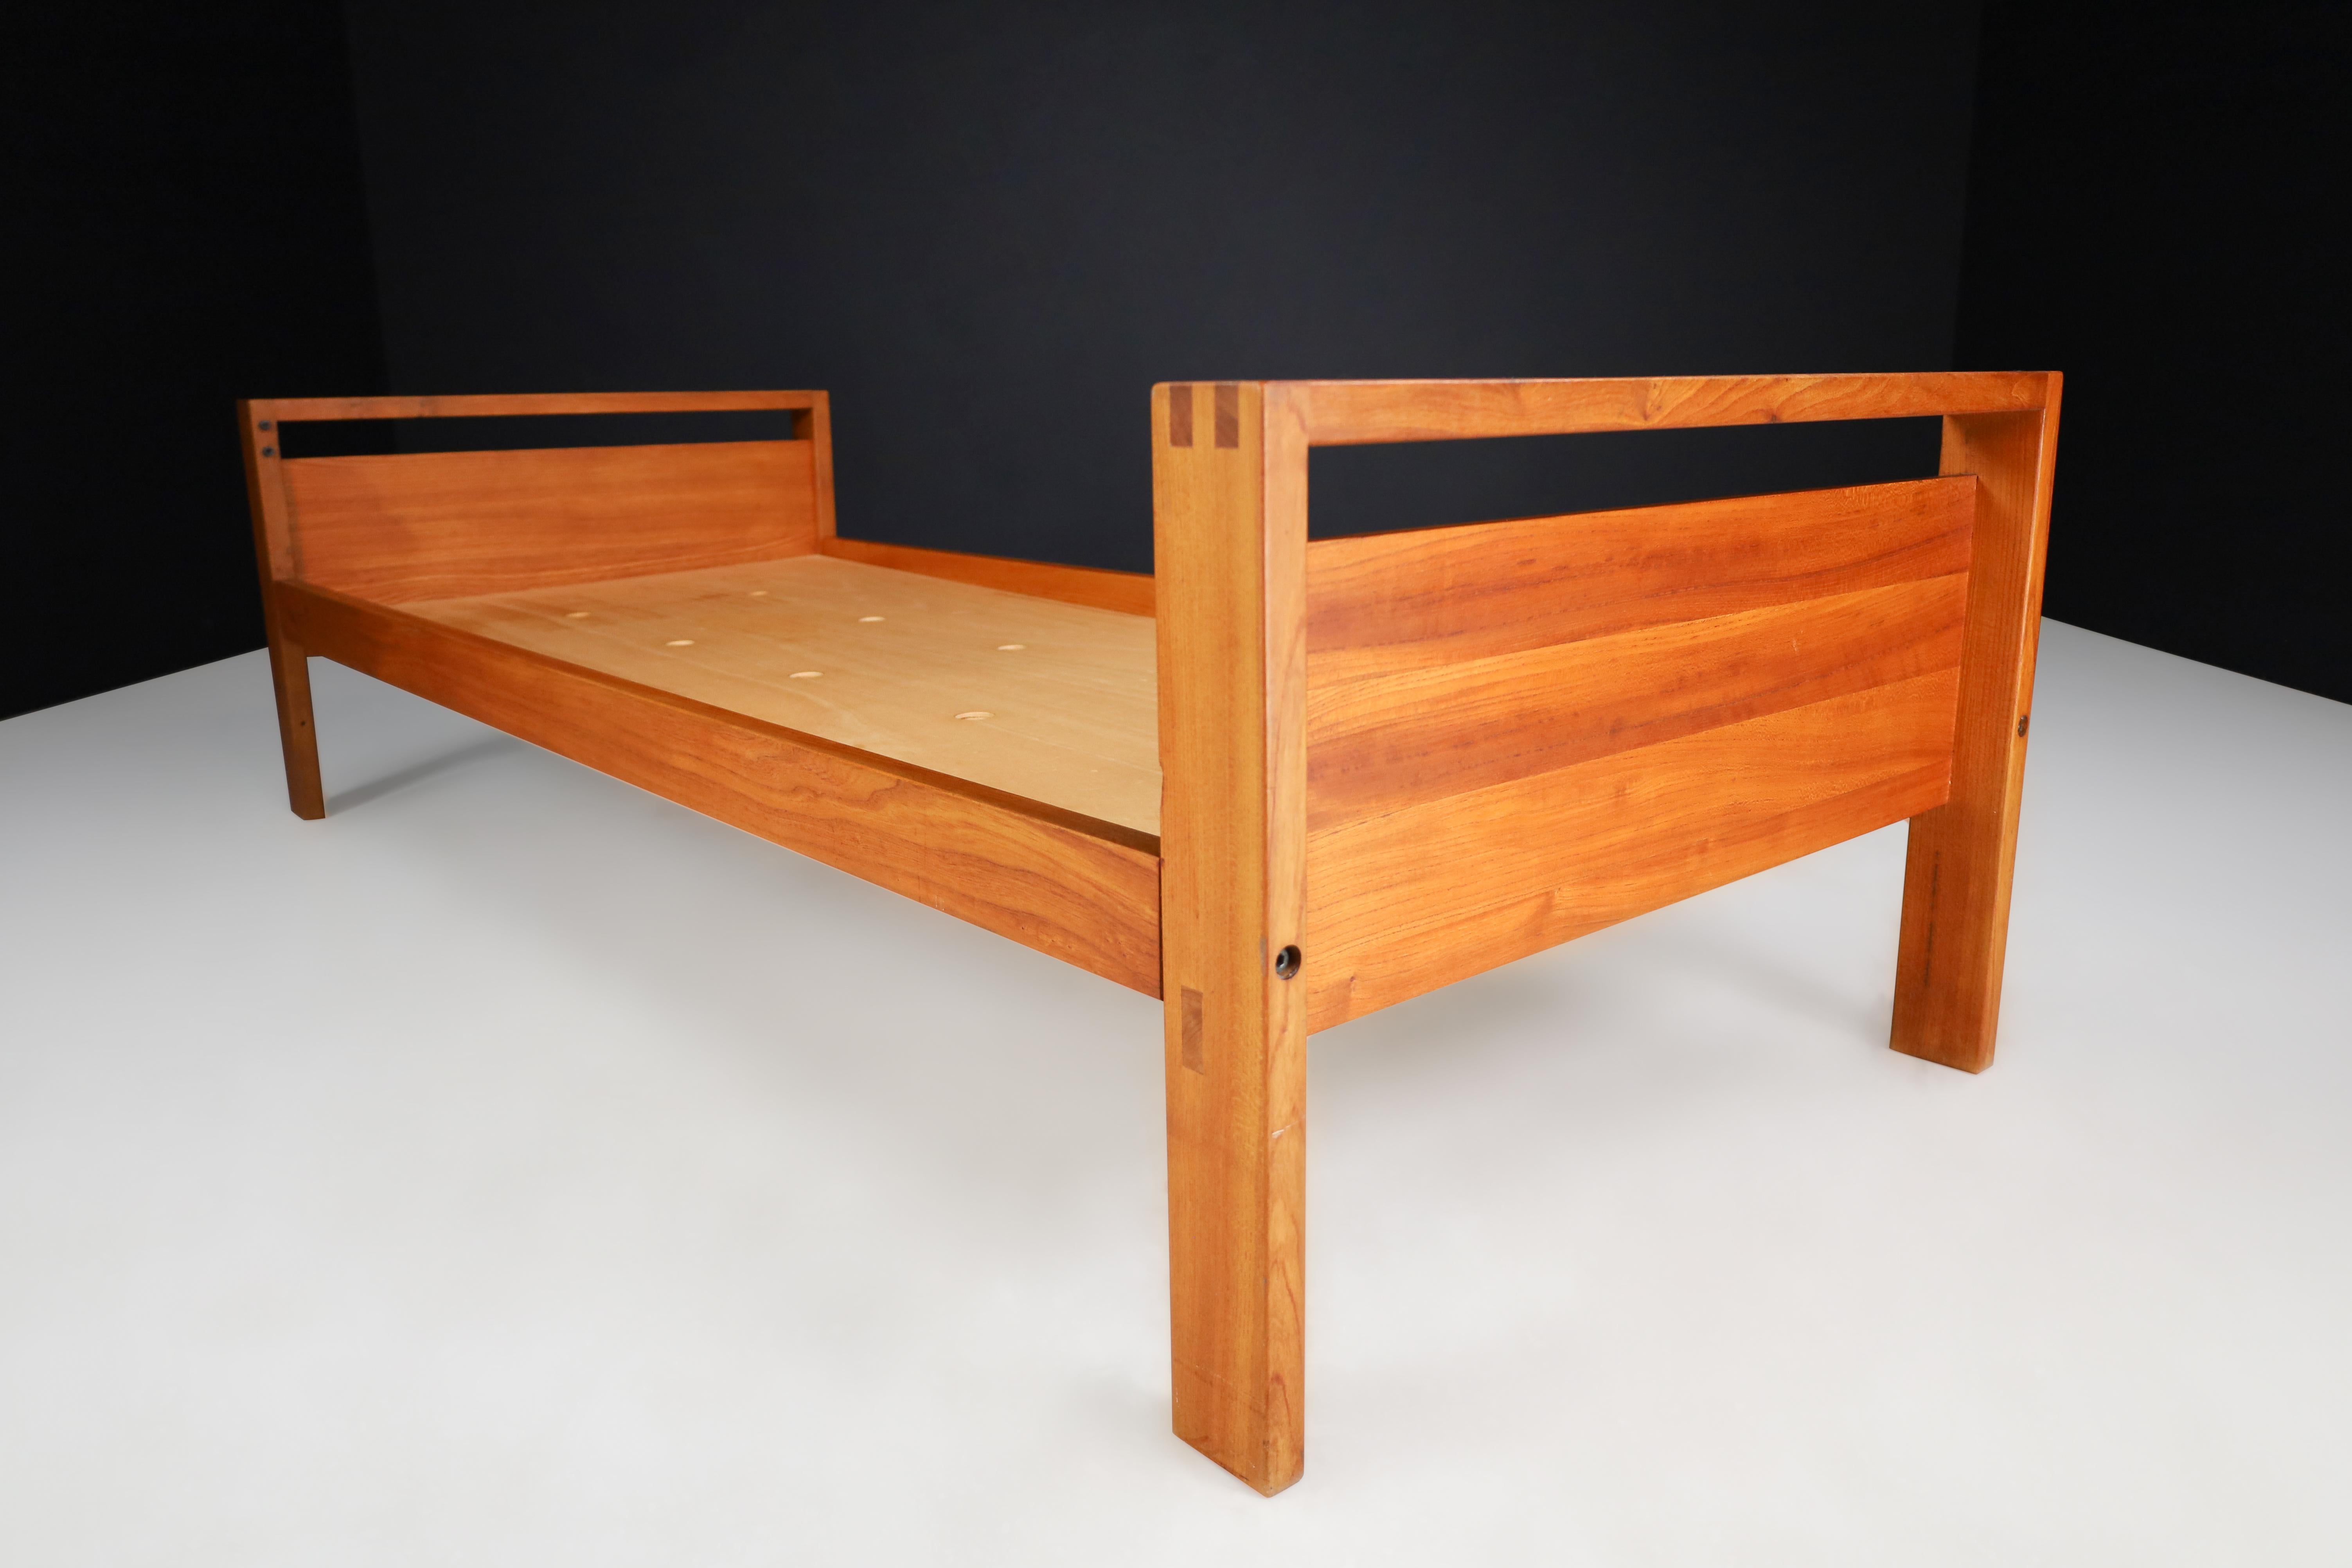 Midcentury Pierre Chapo Lo6a Bed, Daybed in Solid Elm Wood, France, 1960s For Sale 5